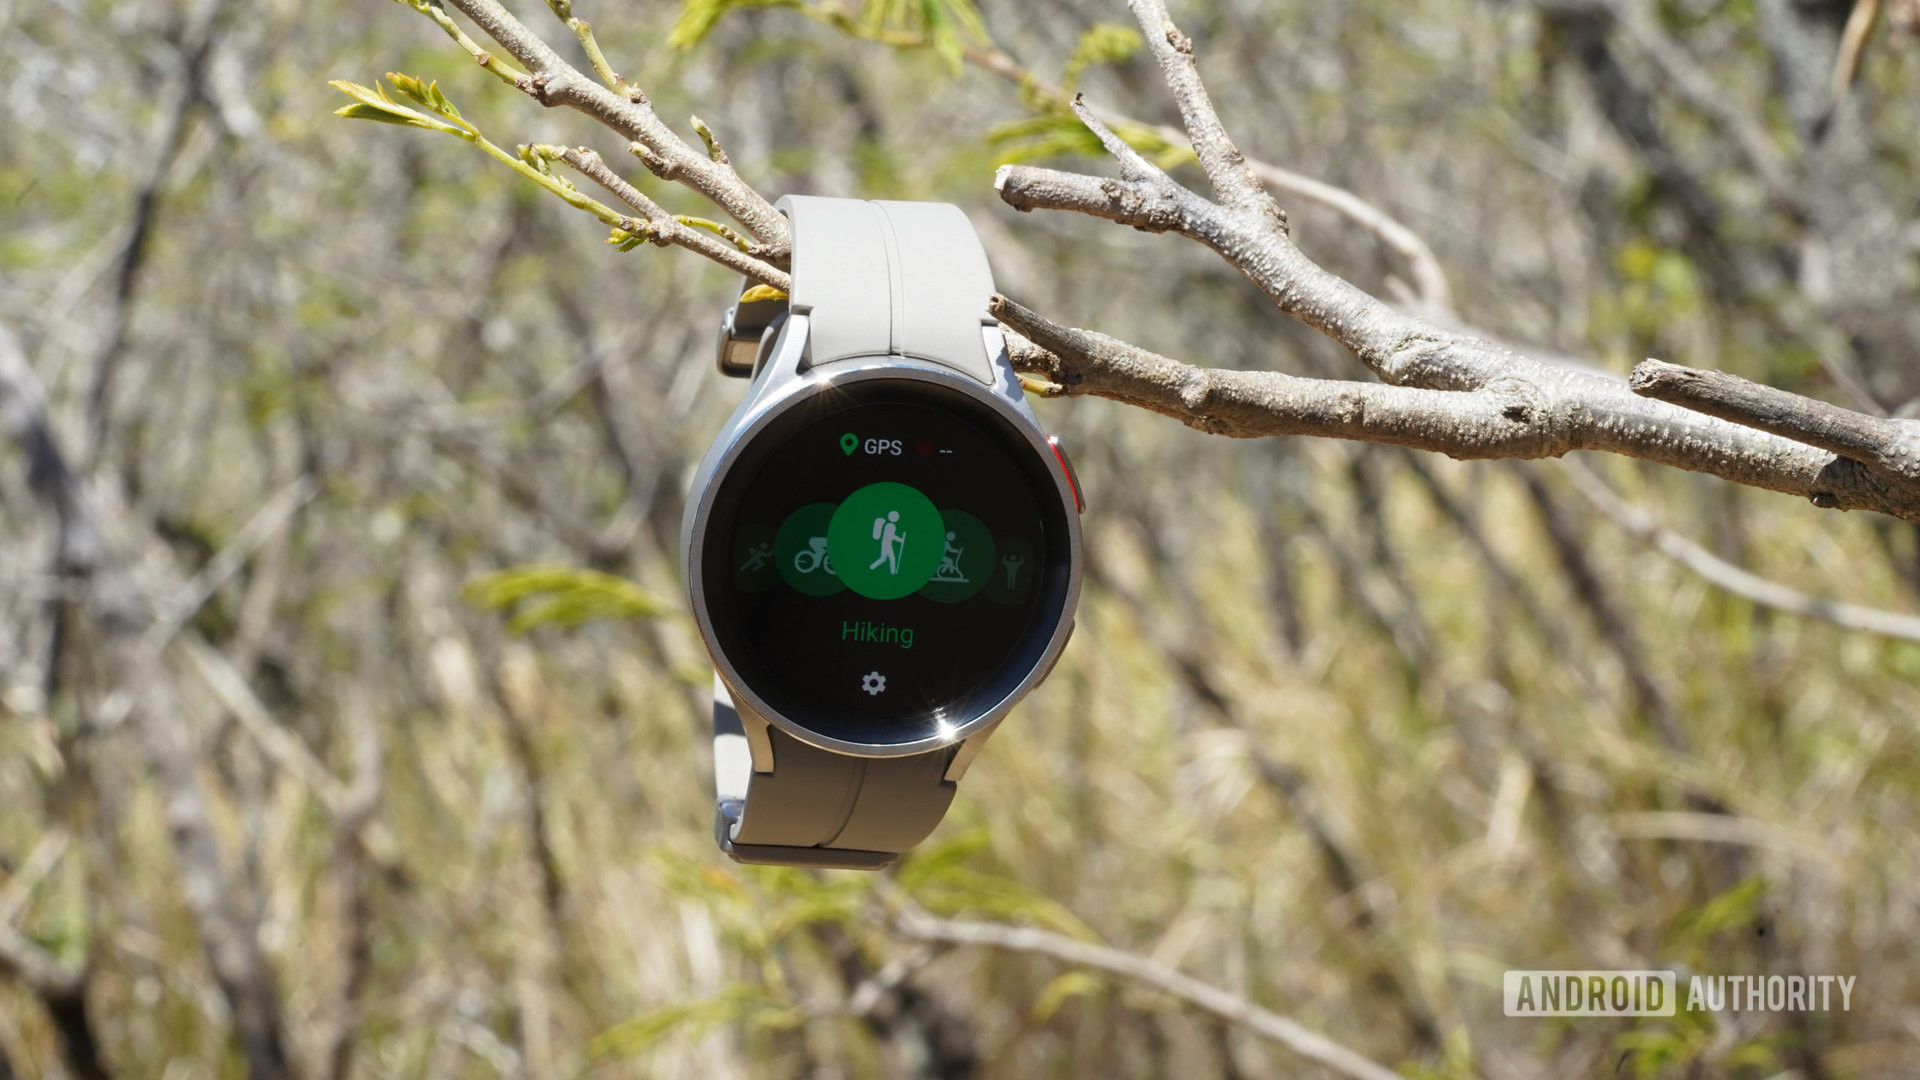 A Samsung Galaxy Watch 5 Pro hangs from a branch and displays the device's sports mode menu.